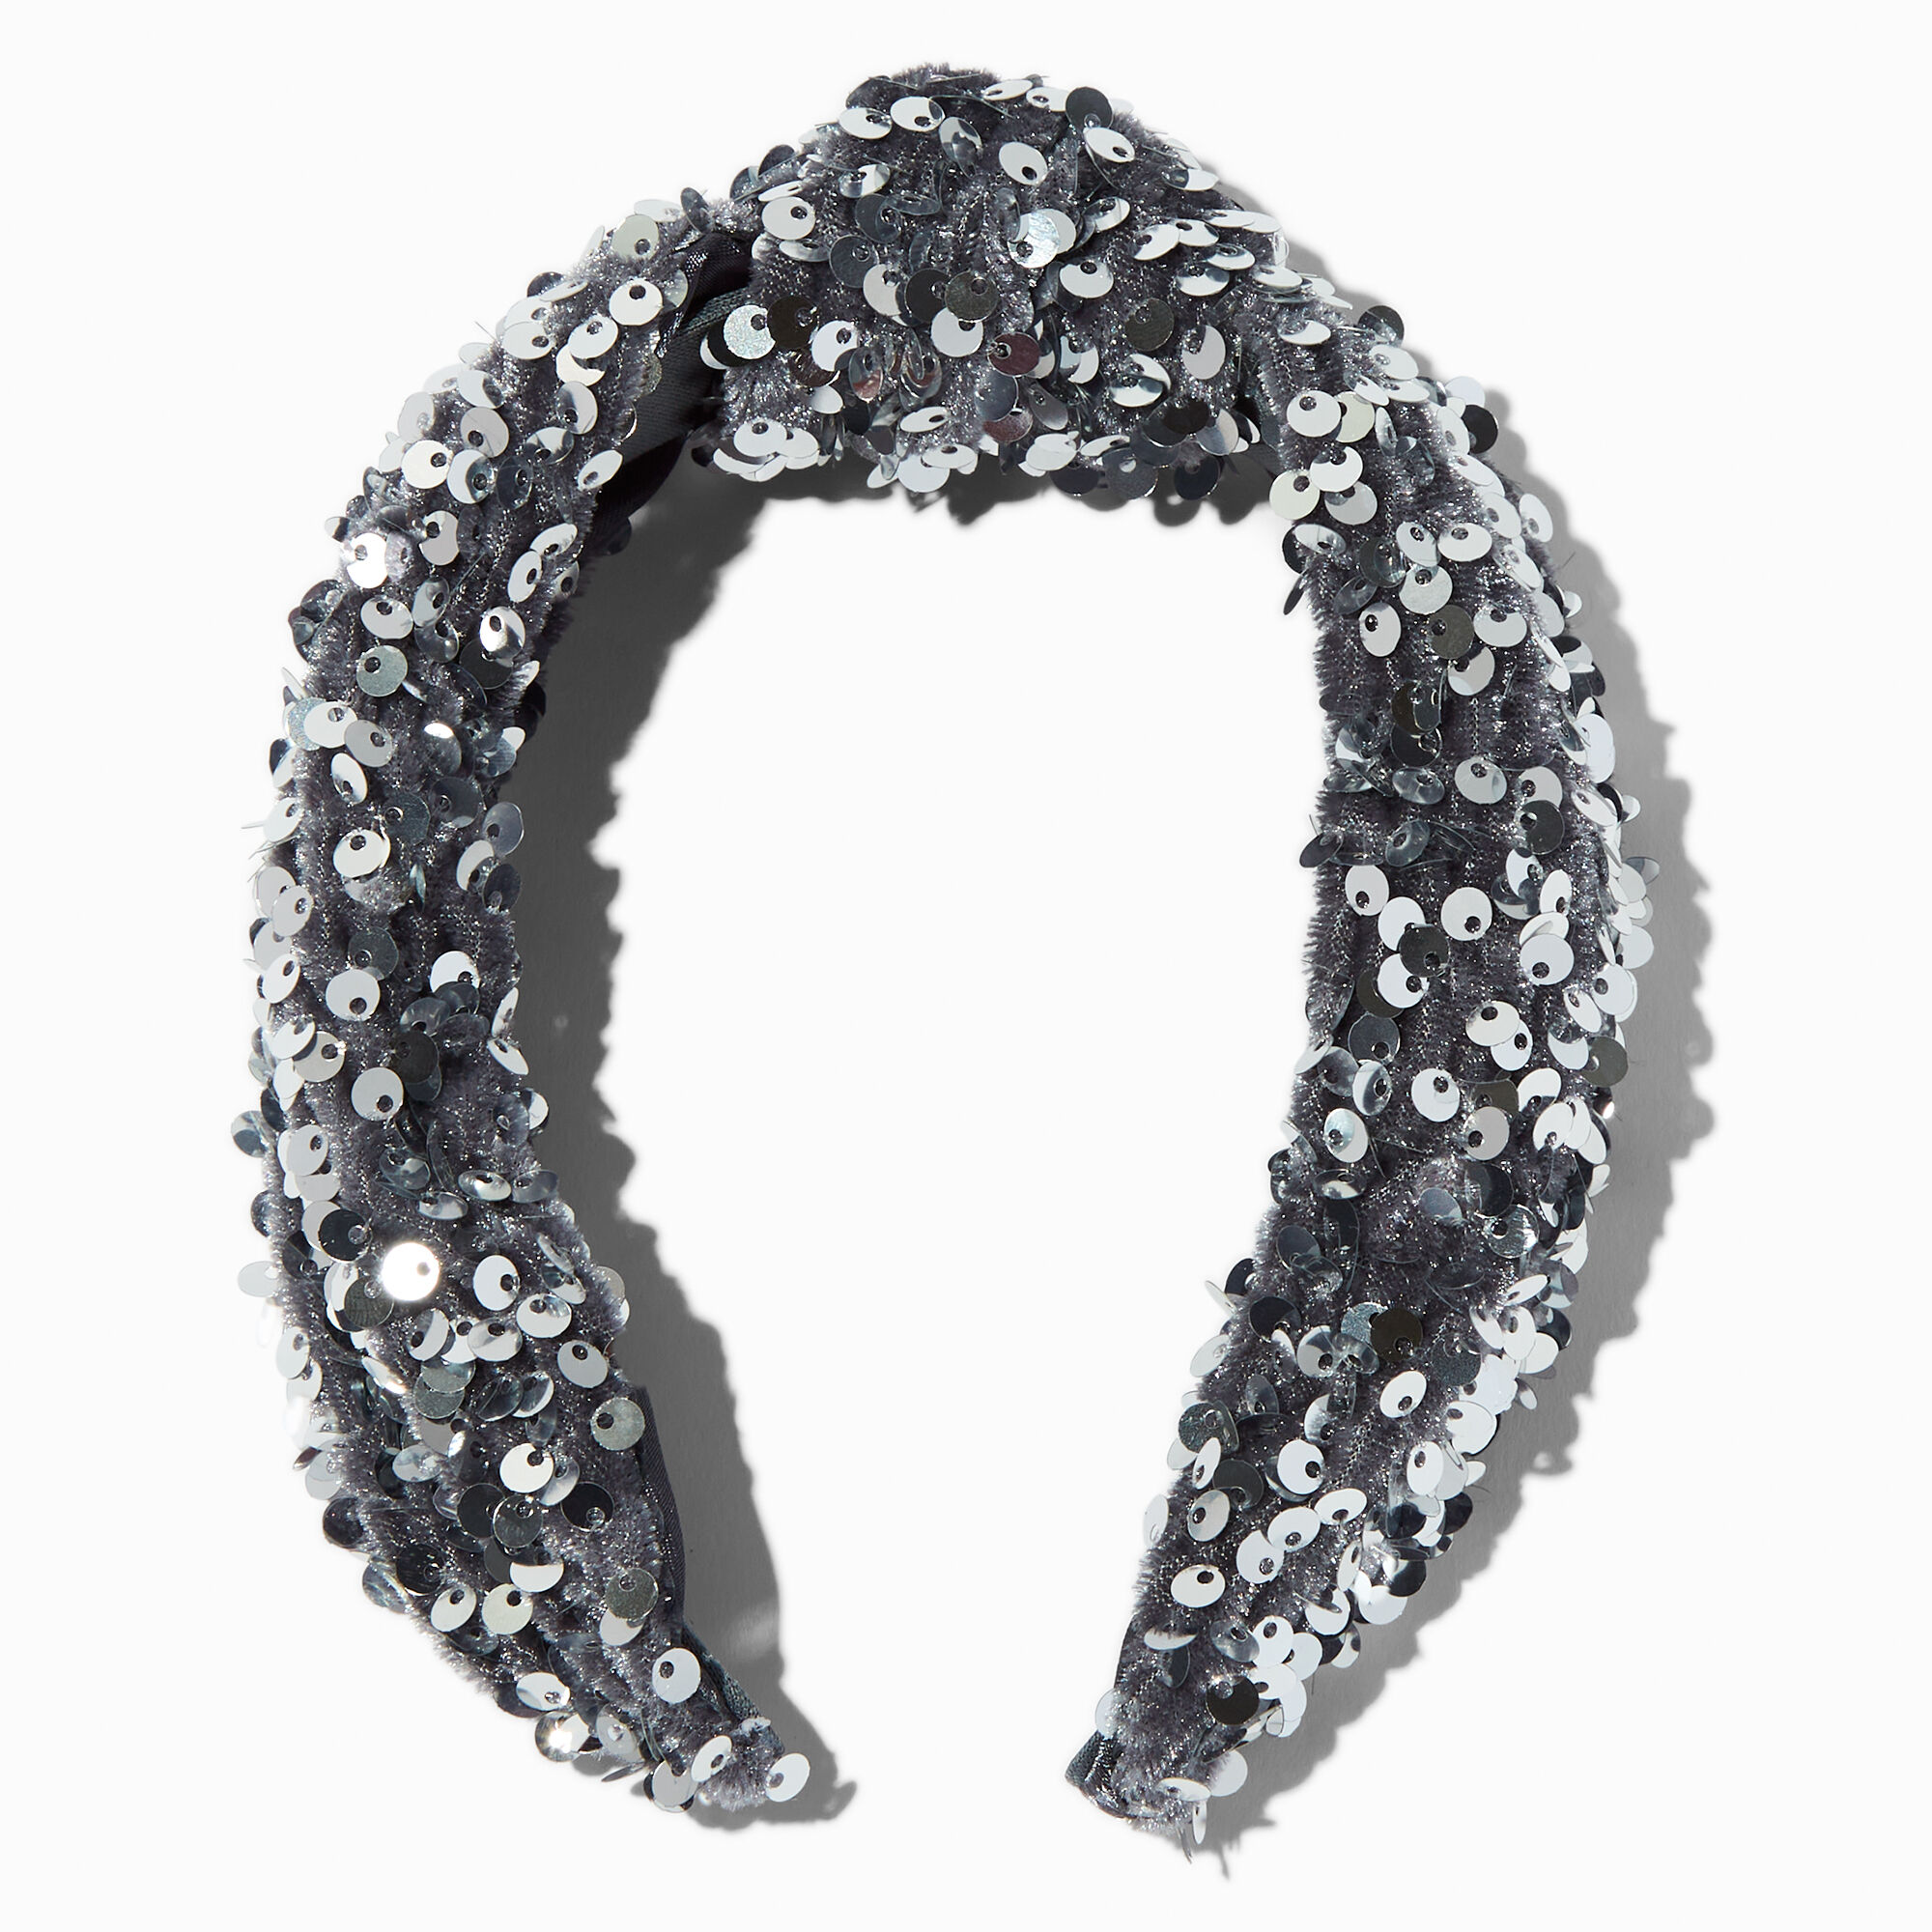 View Claires Sequin Knotted Headband Silver information